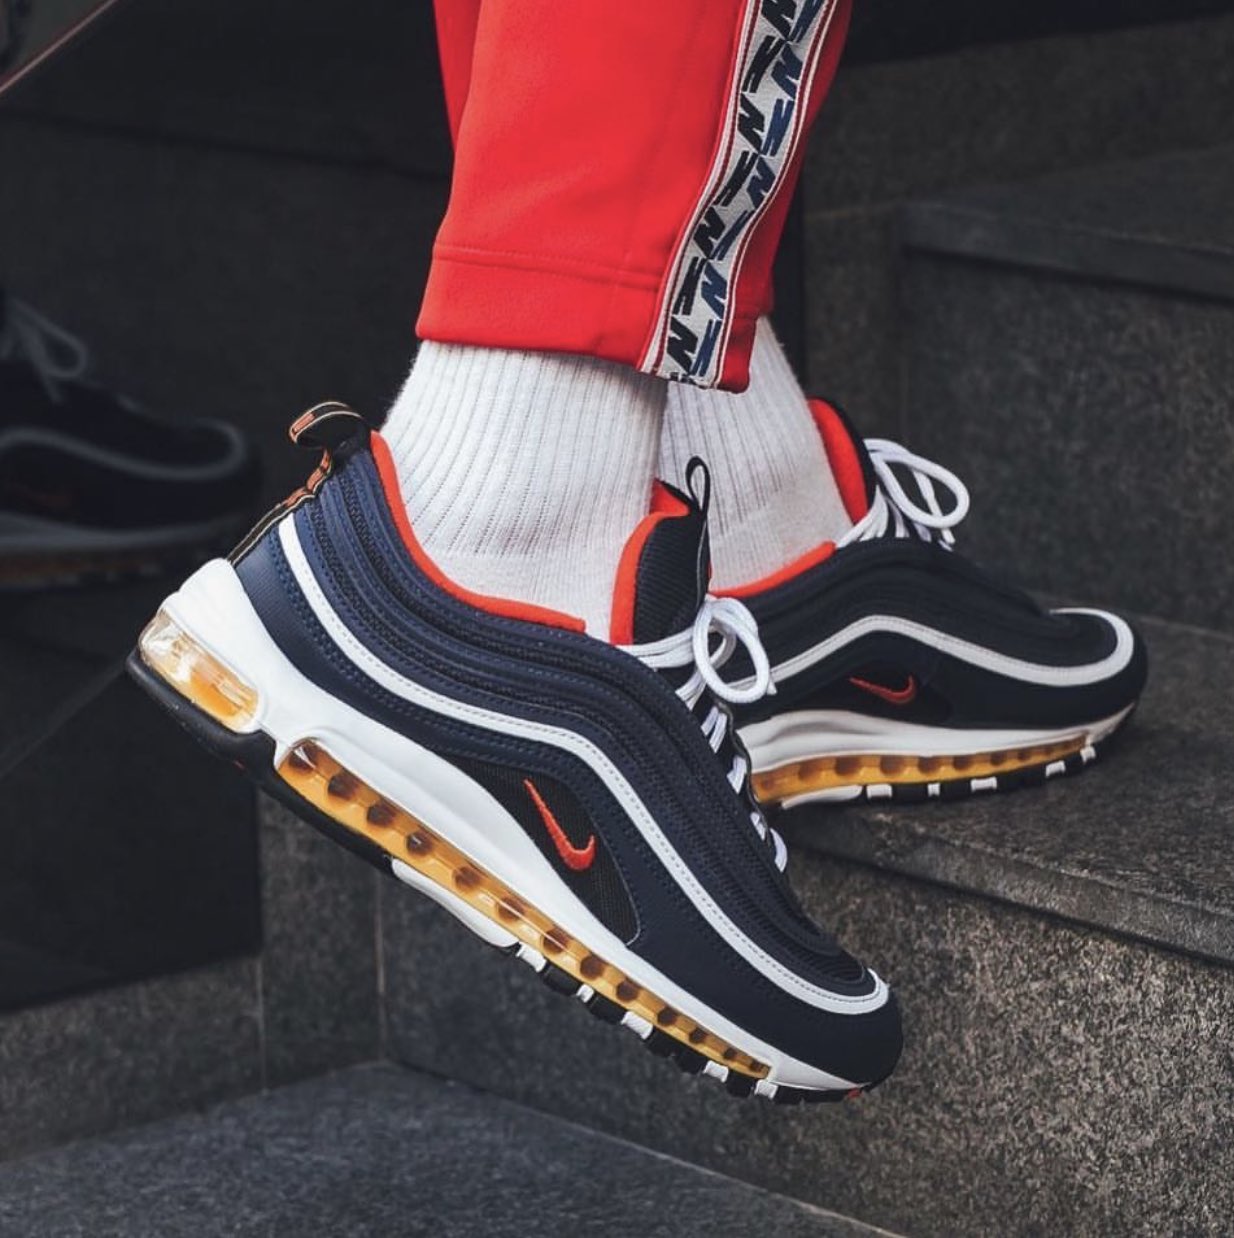 PDK on Twitter: "Nike Air Max 97 “Midnight Navy/ Red” | Would you https://t.co/wEeLZCAVCl" /